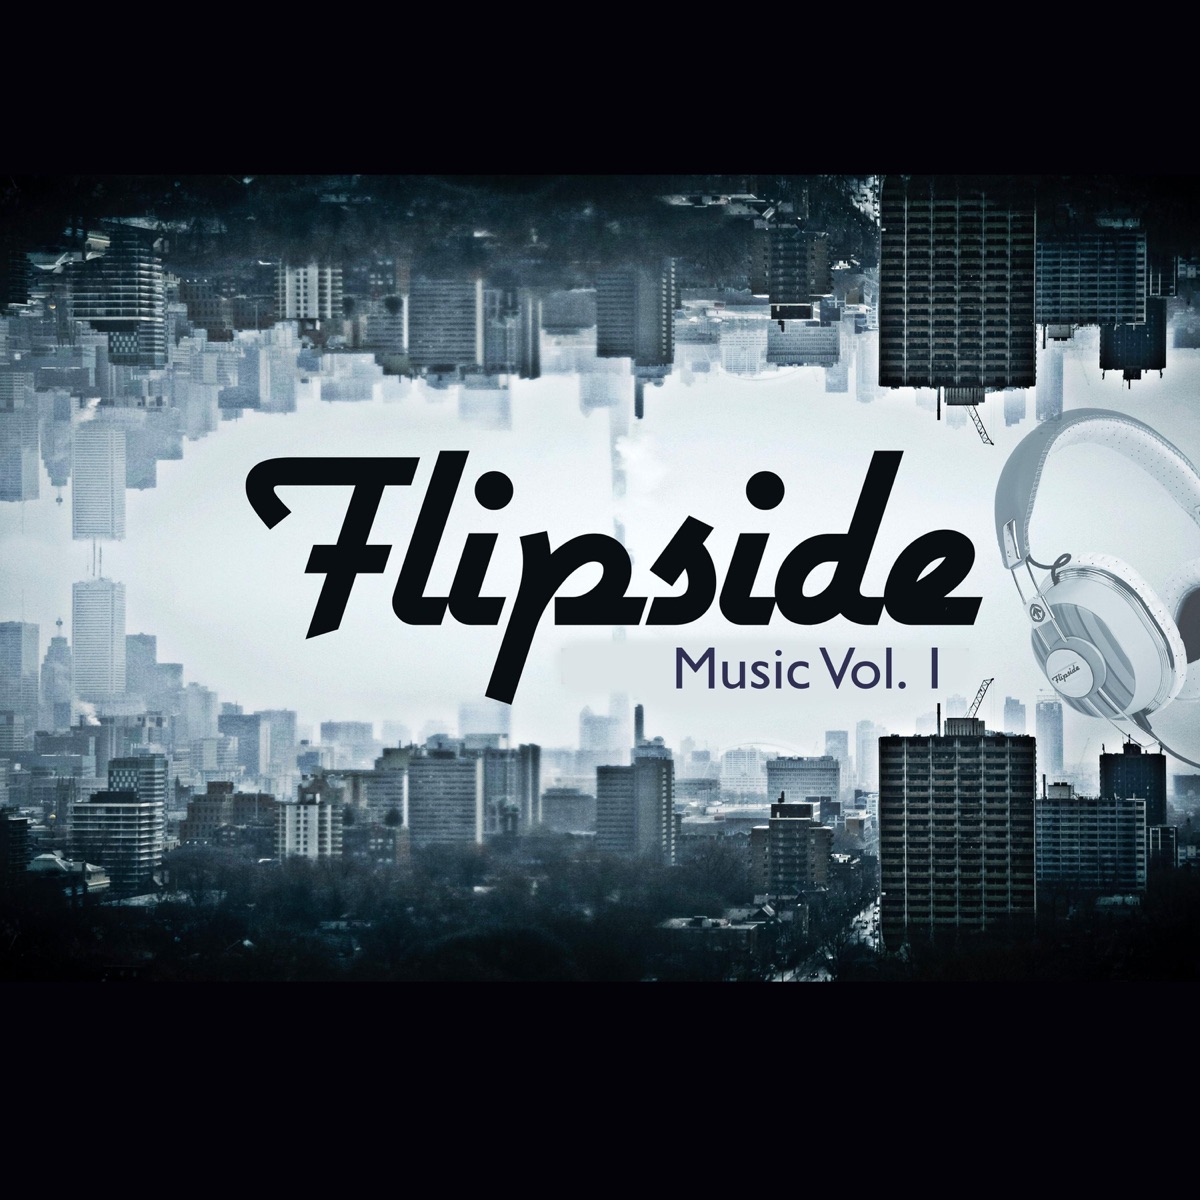 On the Flipside Music